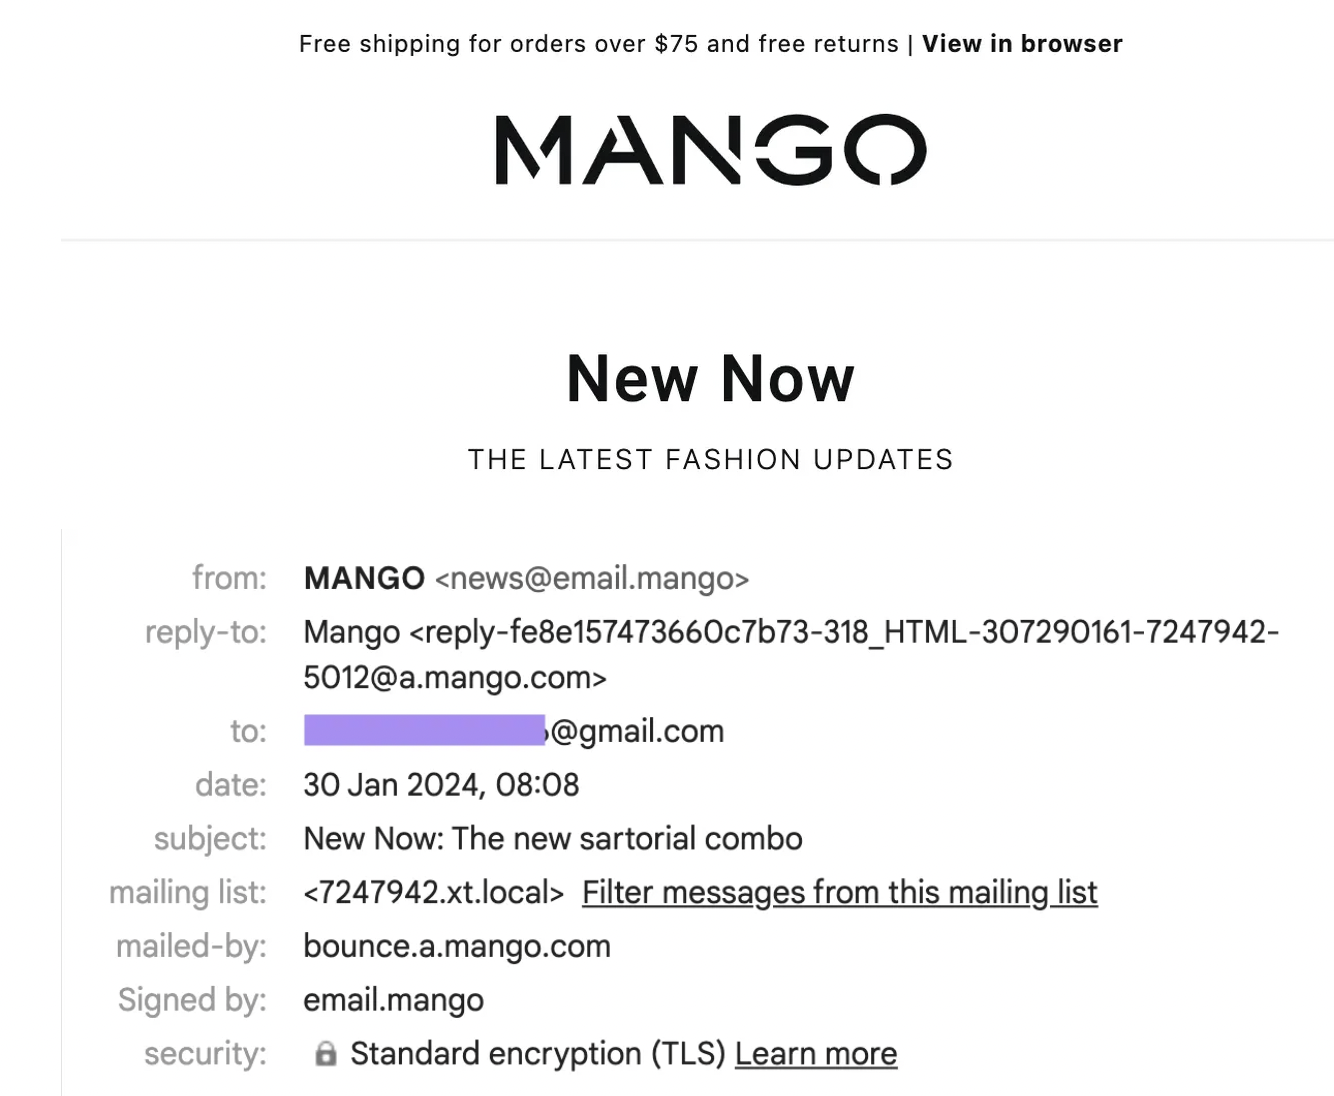 Screenshot of an email campaign from Mango with a subject titled "fashion updates"